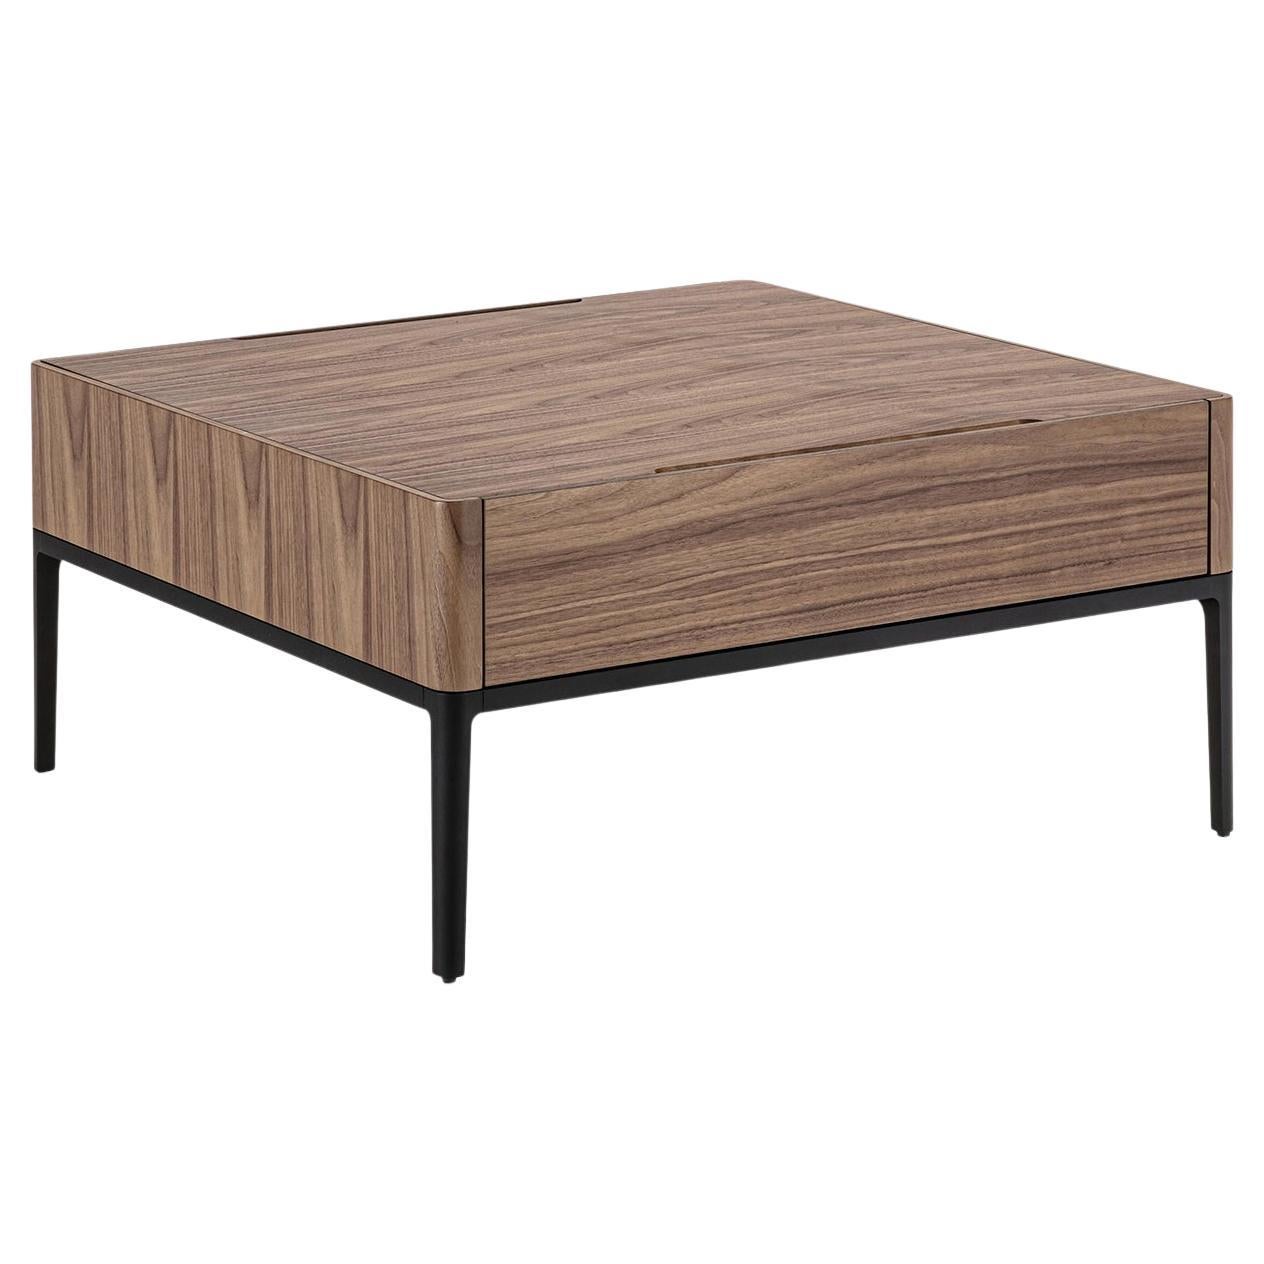 Walnut Case Square Coffee Table For Sale